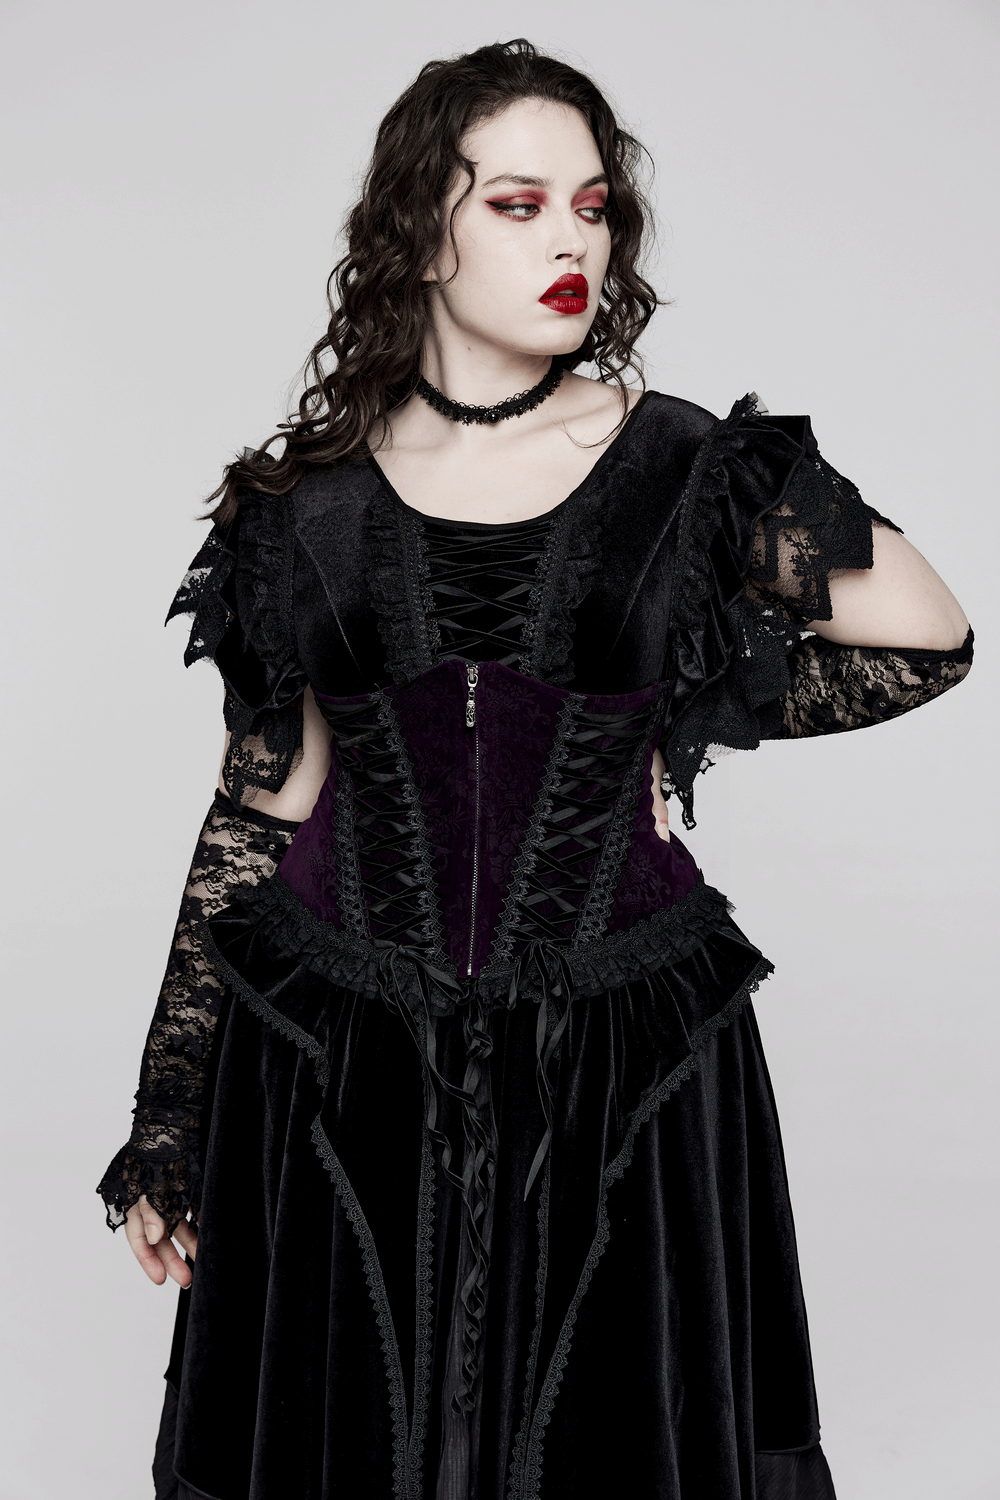 Velvet Goth Corset with Lace Trim and Front Zipper - HARD'N'HEAVY